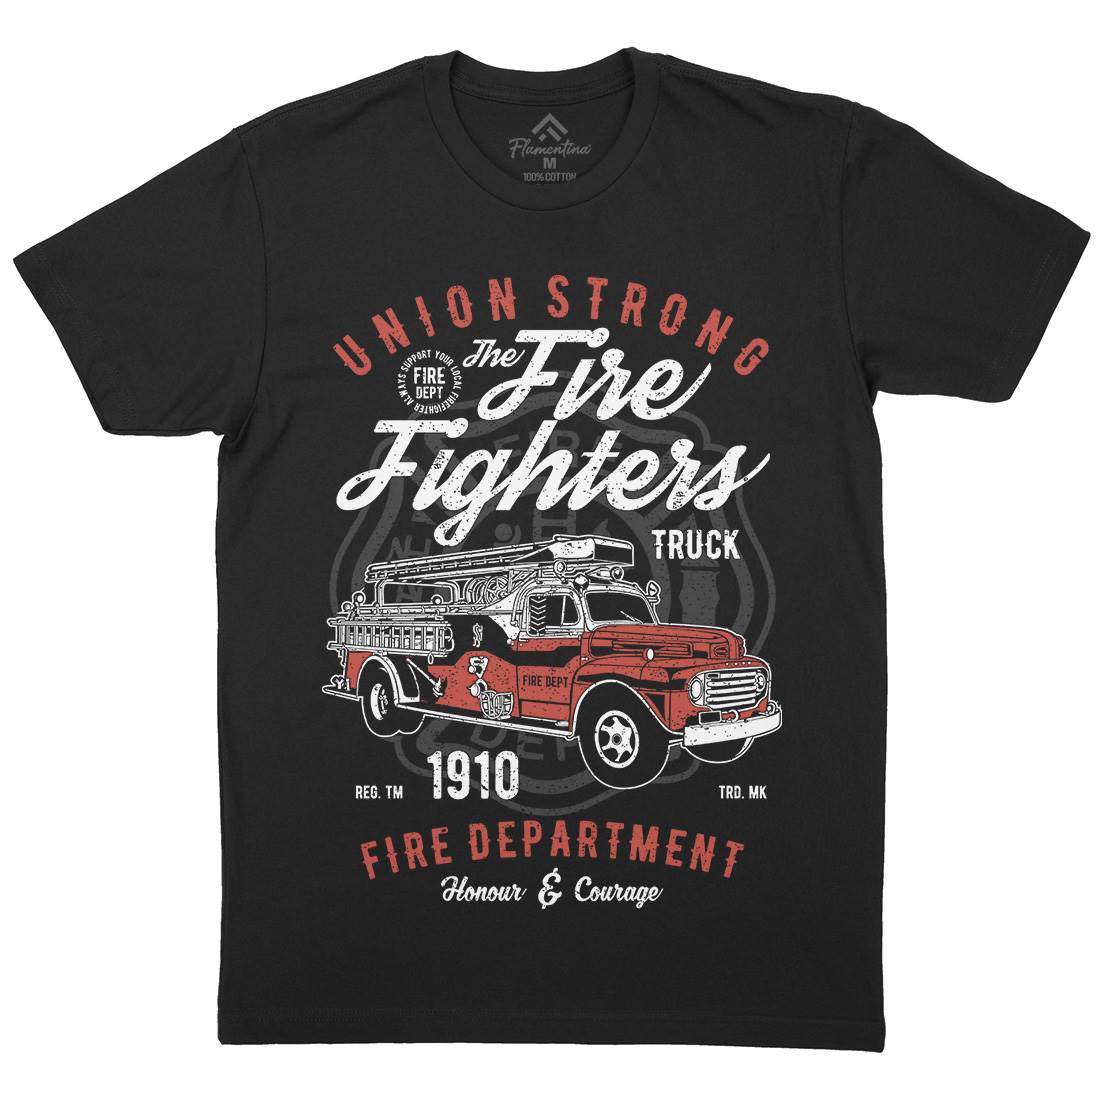 Union Strong Mens Crew Neck T-Shirt Firefighters A781